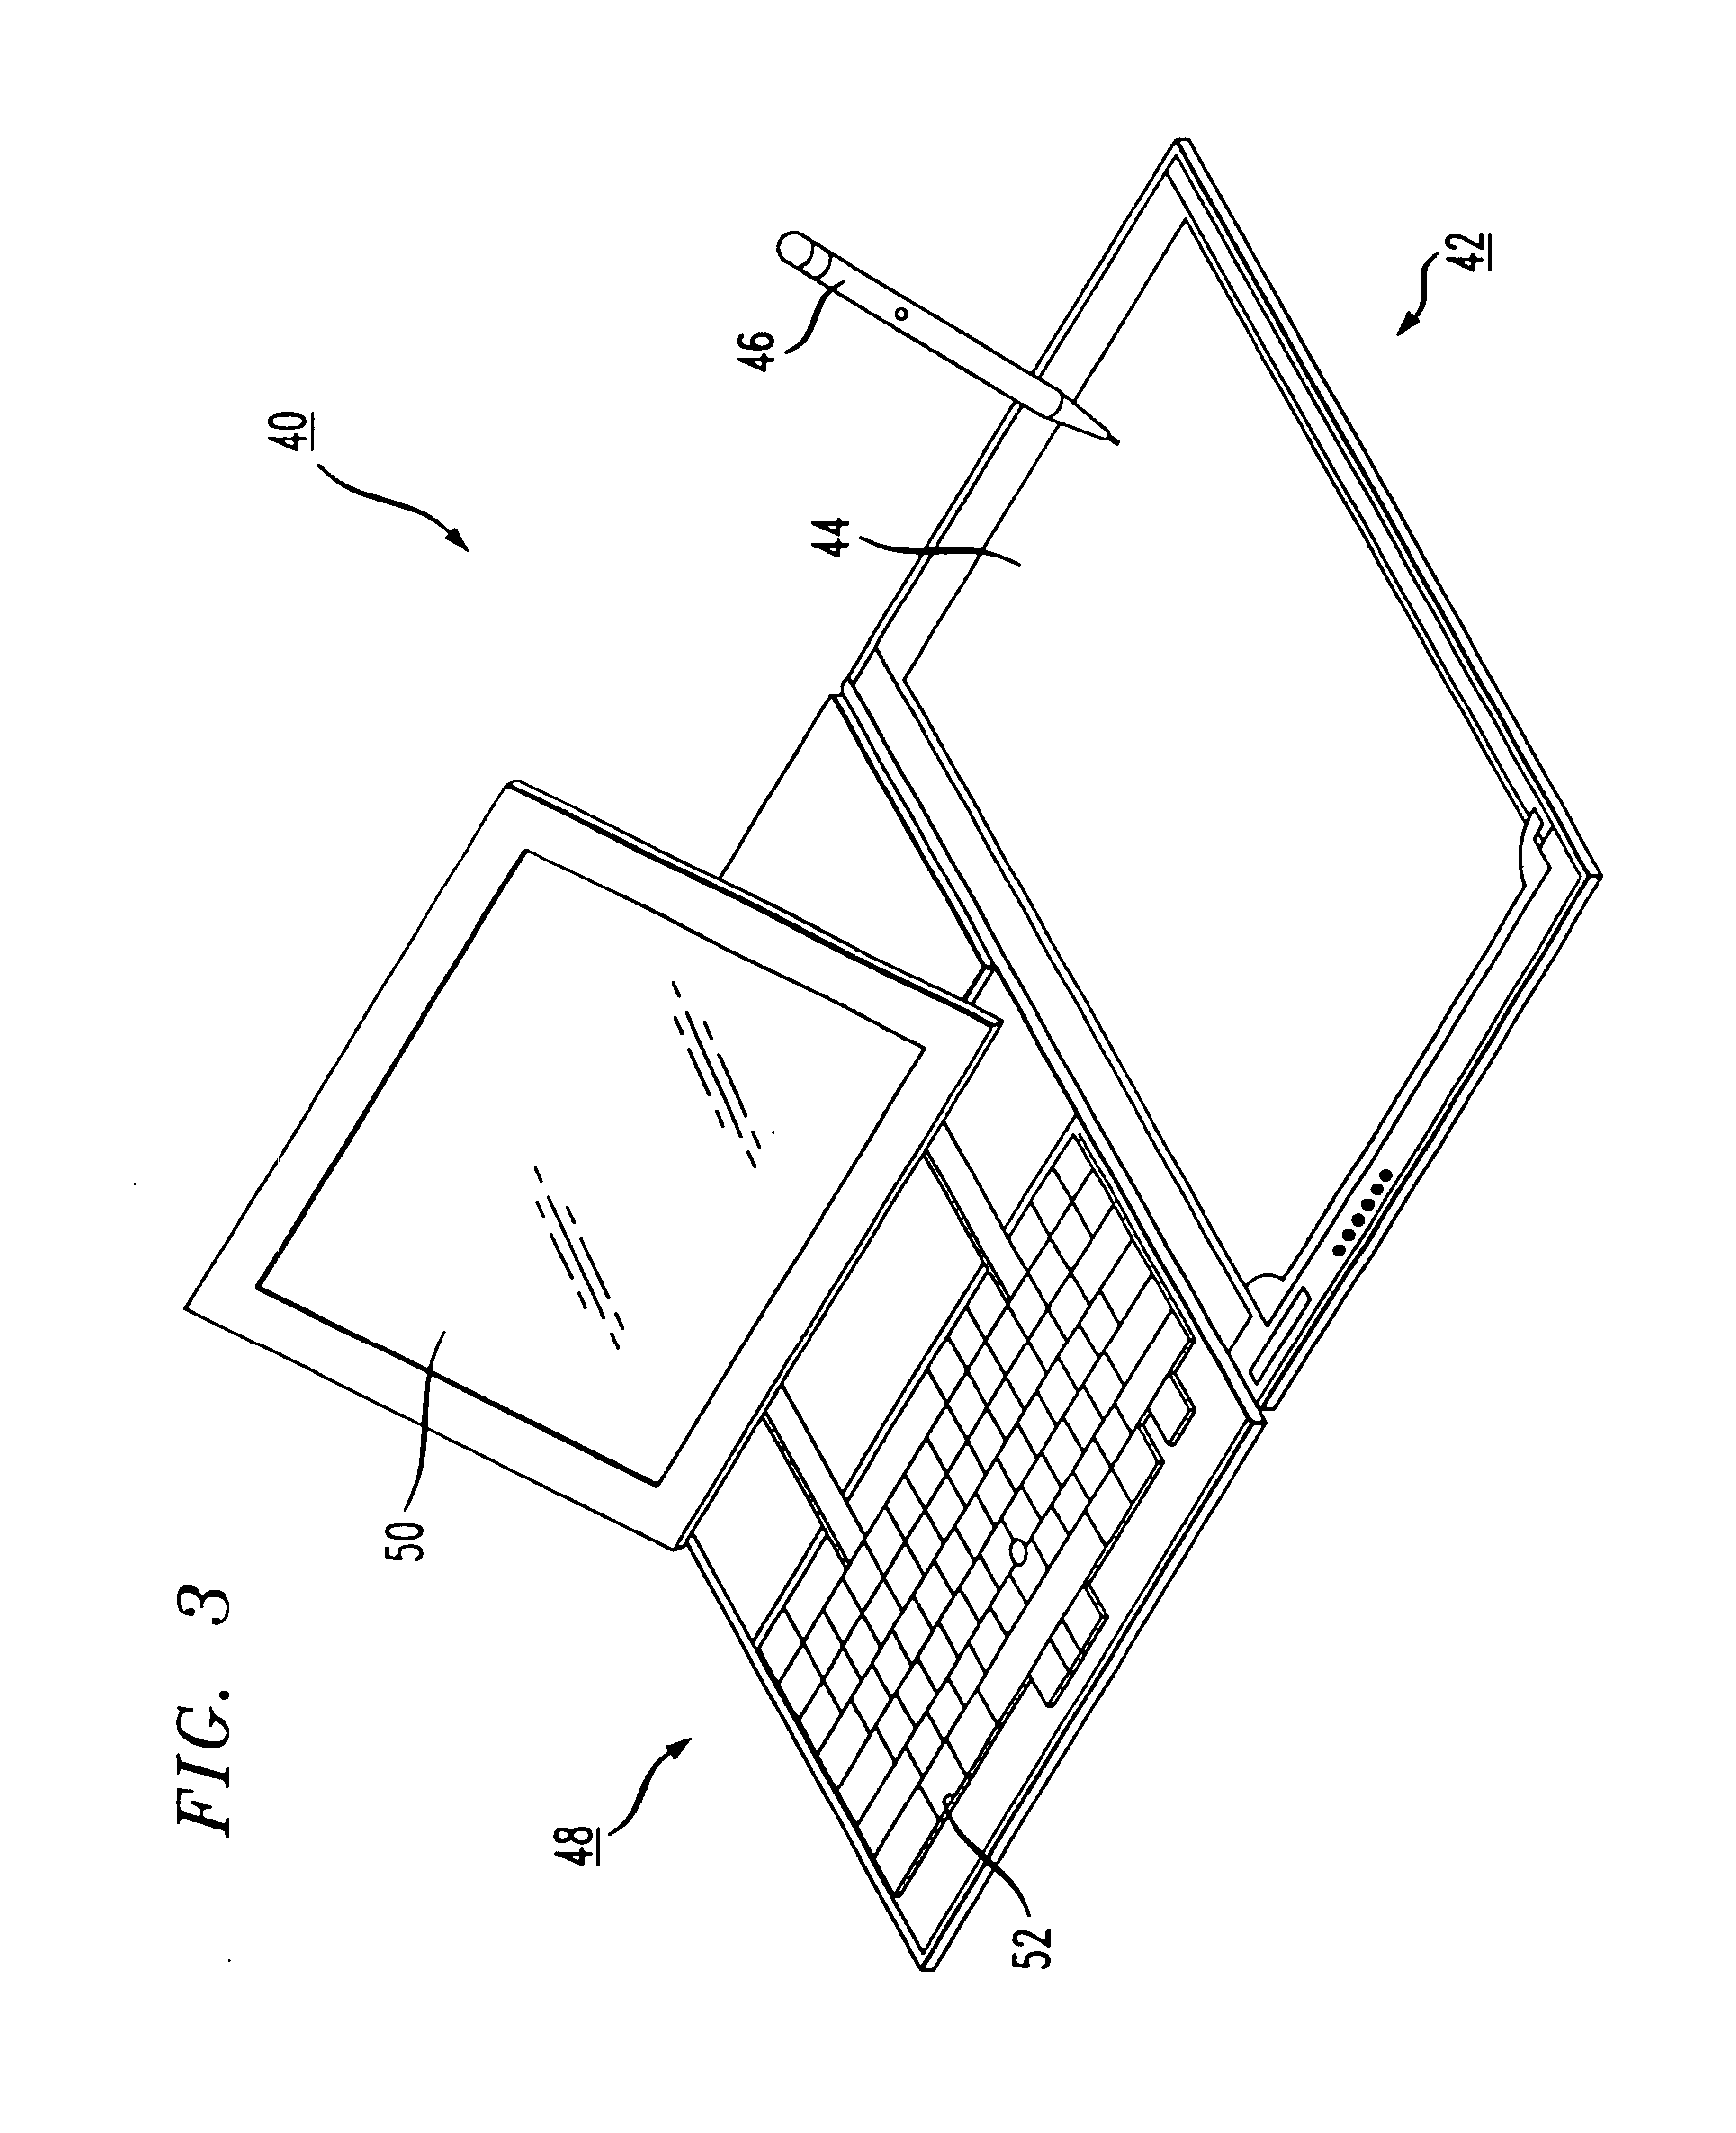 Methods and apparatus for formatted entry of electronic ink